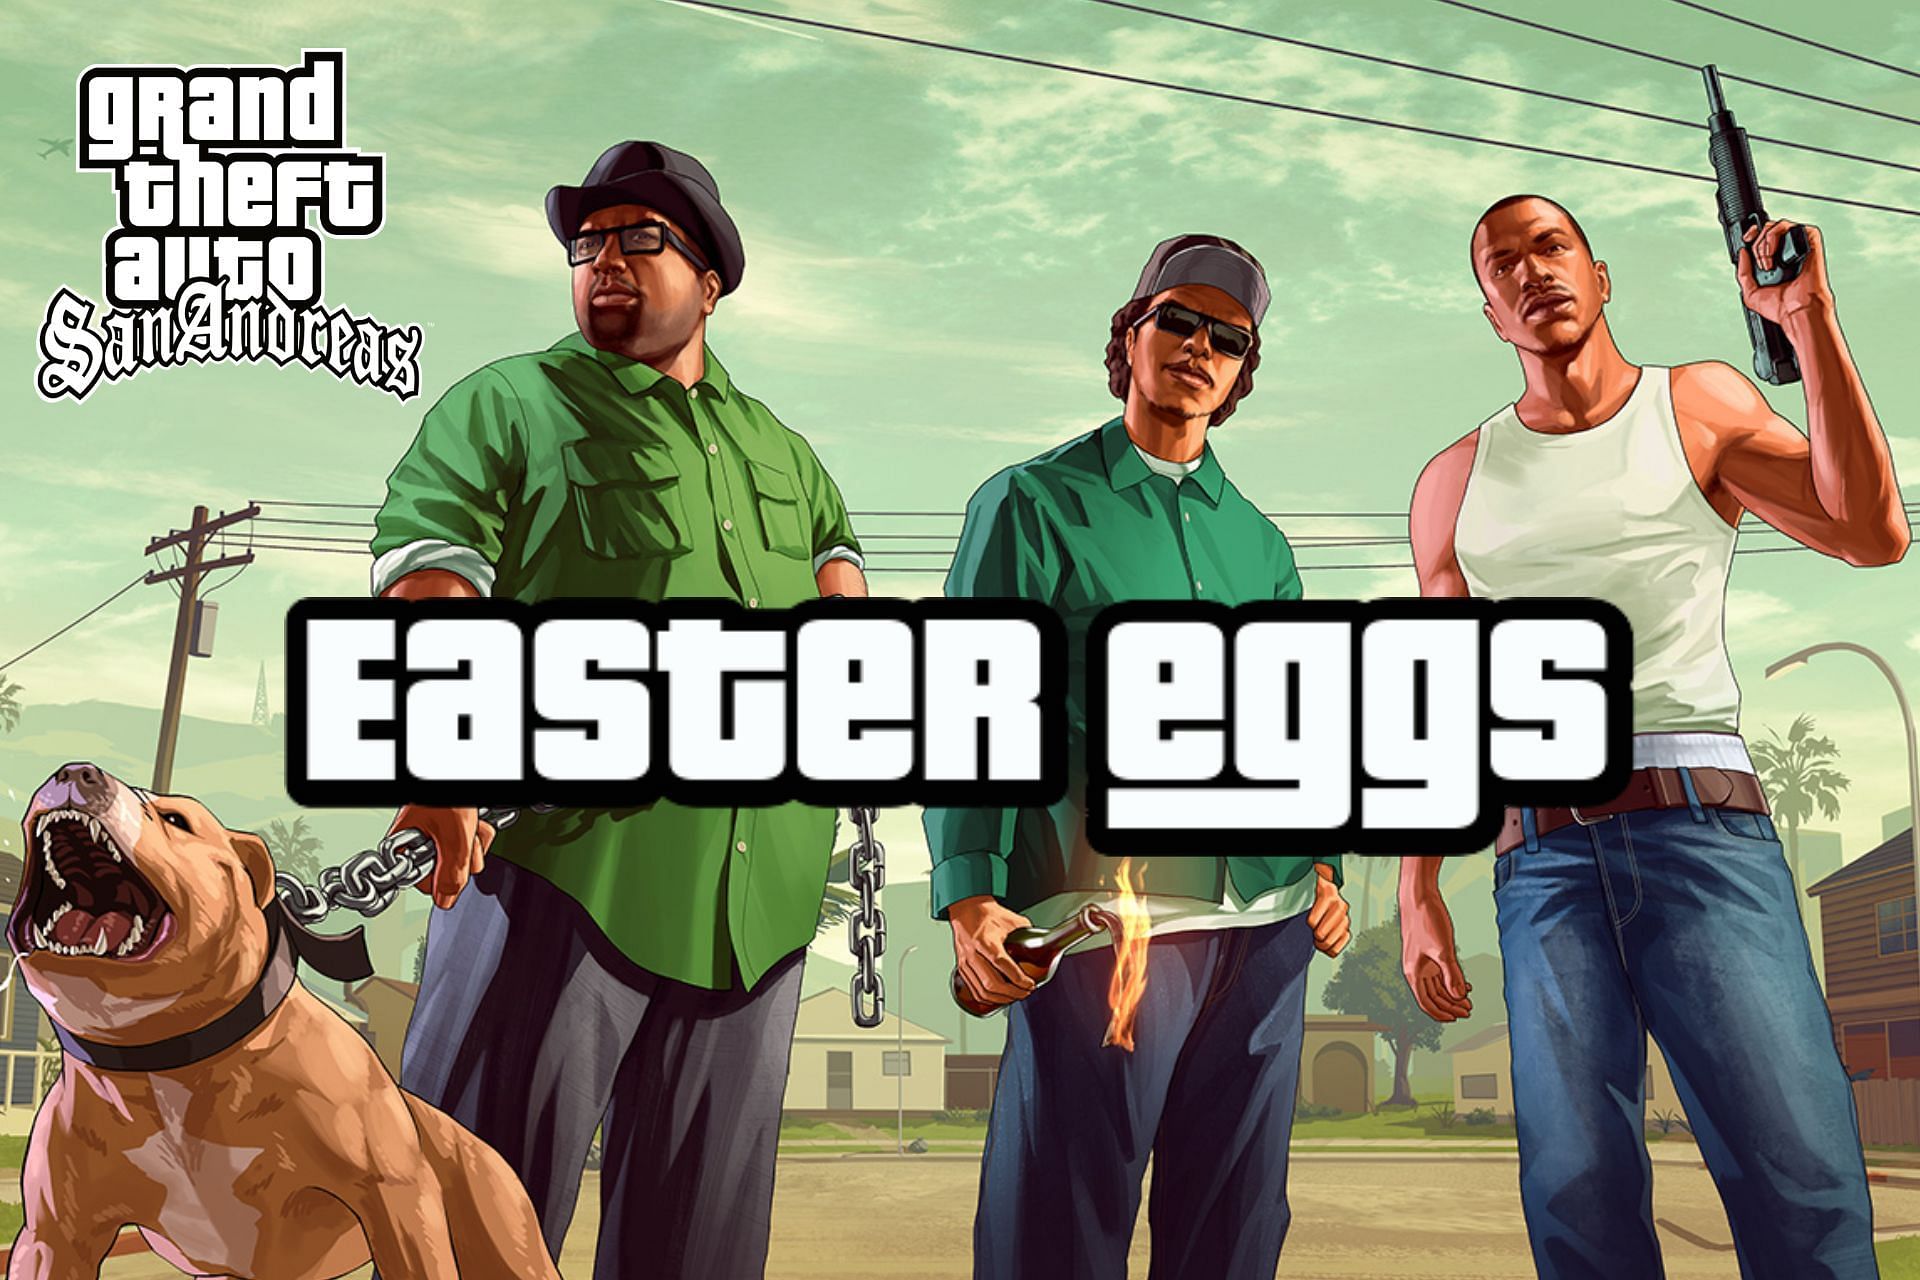 GTA players should look for these Easter eggs in San Andreas (Image via HDQwalls)